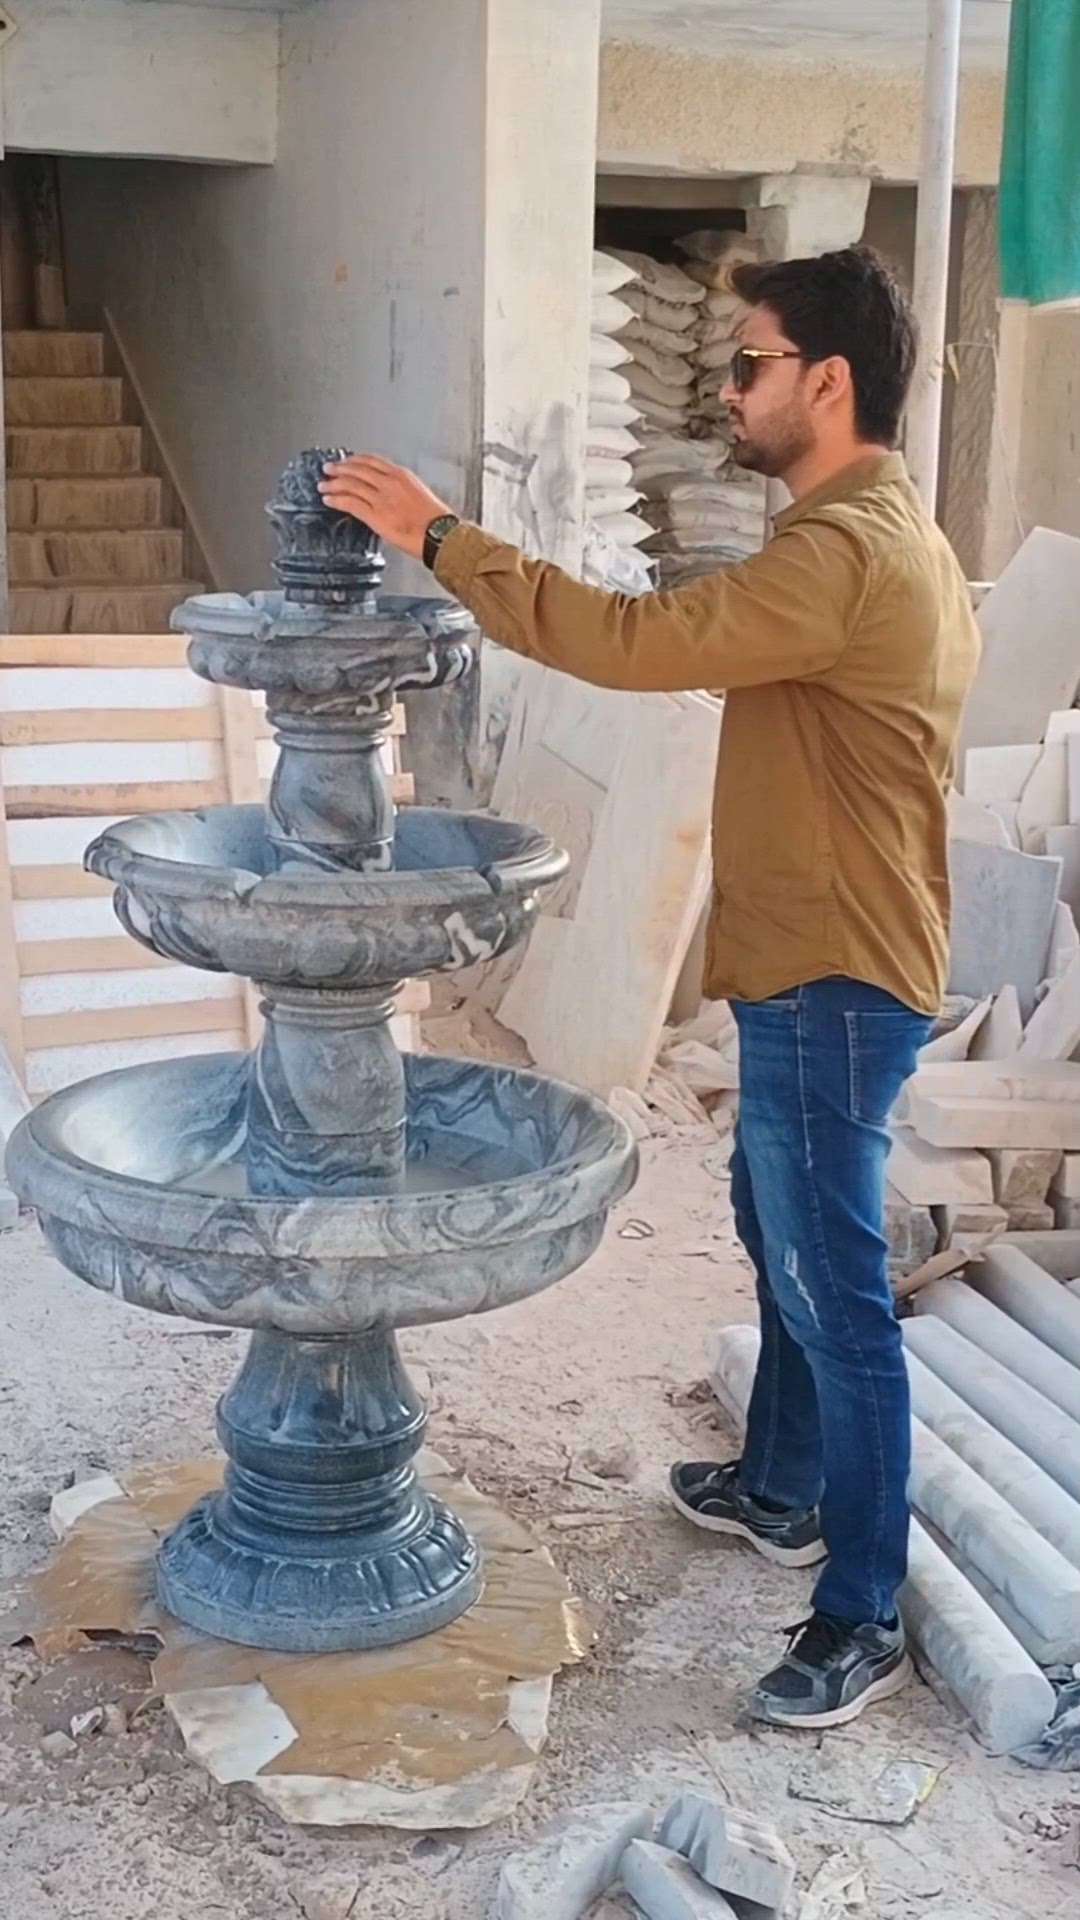 Black Marble Fountain

Decor your garden with beautiful fountain

We are manufacturer of marble and sandstone fountain

We make any design according to your requirement and size

Follow me @nbmarble 

More information contact me
8233078099

#nbmarble #fountain #gardendecor #marblework #marblefountain #blackmarble #gardeninspiration #interior